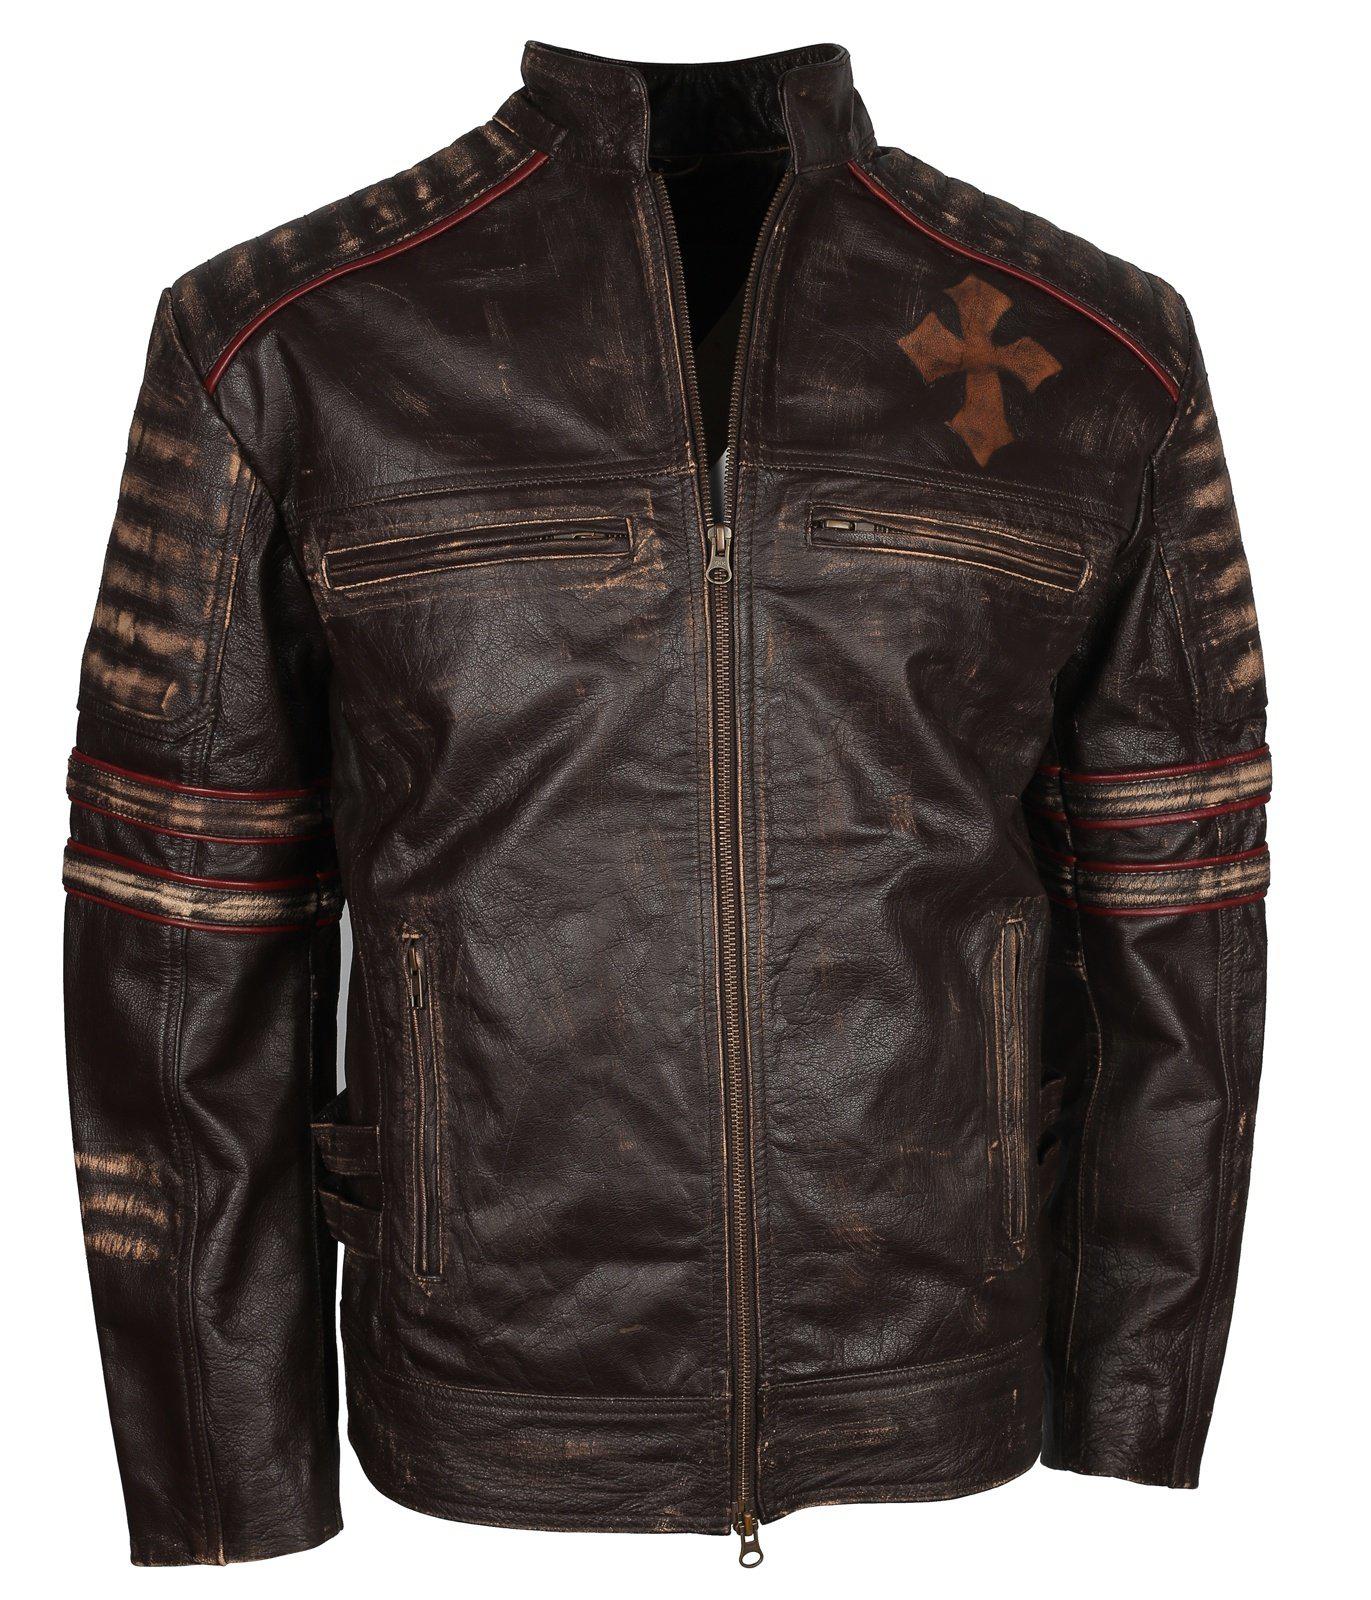 Vintage Leather Jacket - Live to Ride